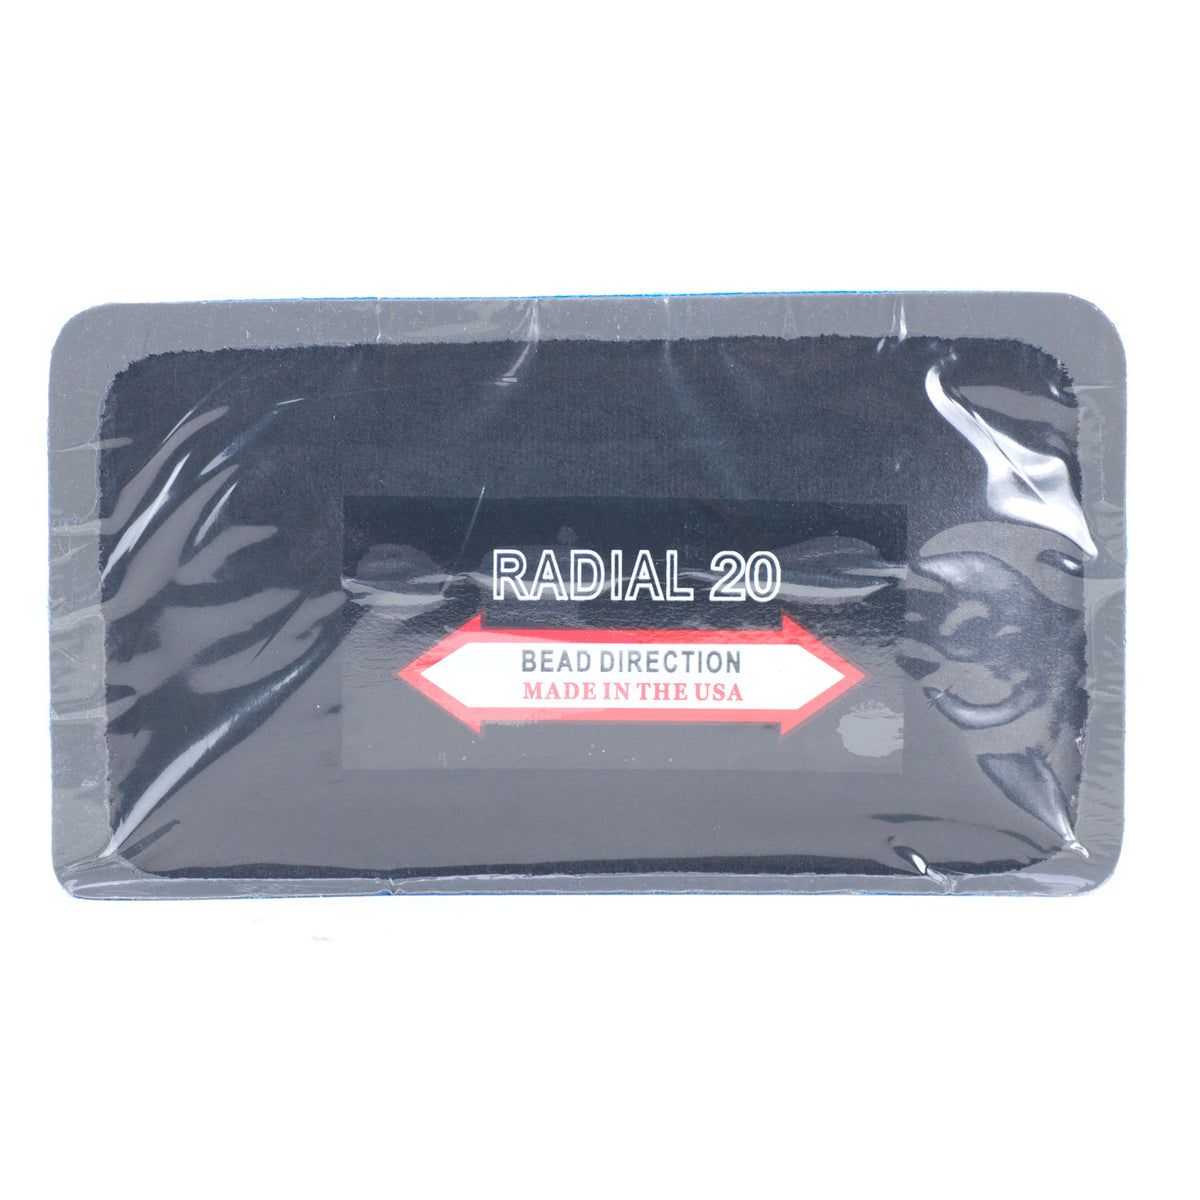 Xtra Seal Radial 20 Patch Repair (2 Ply) (11-820)